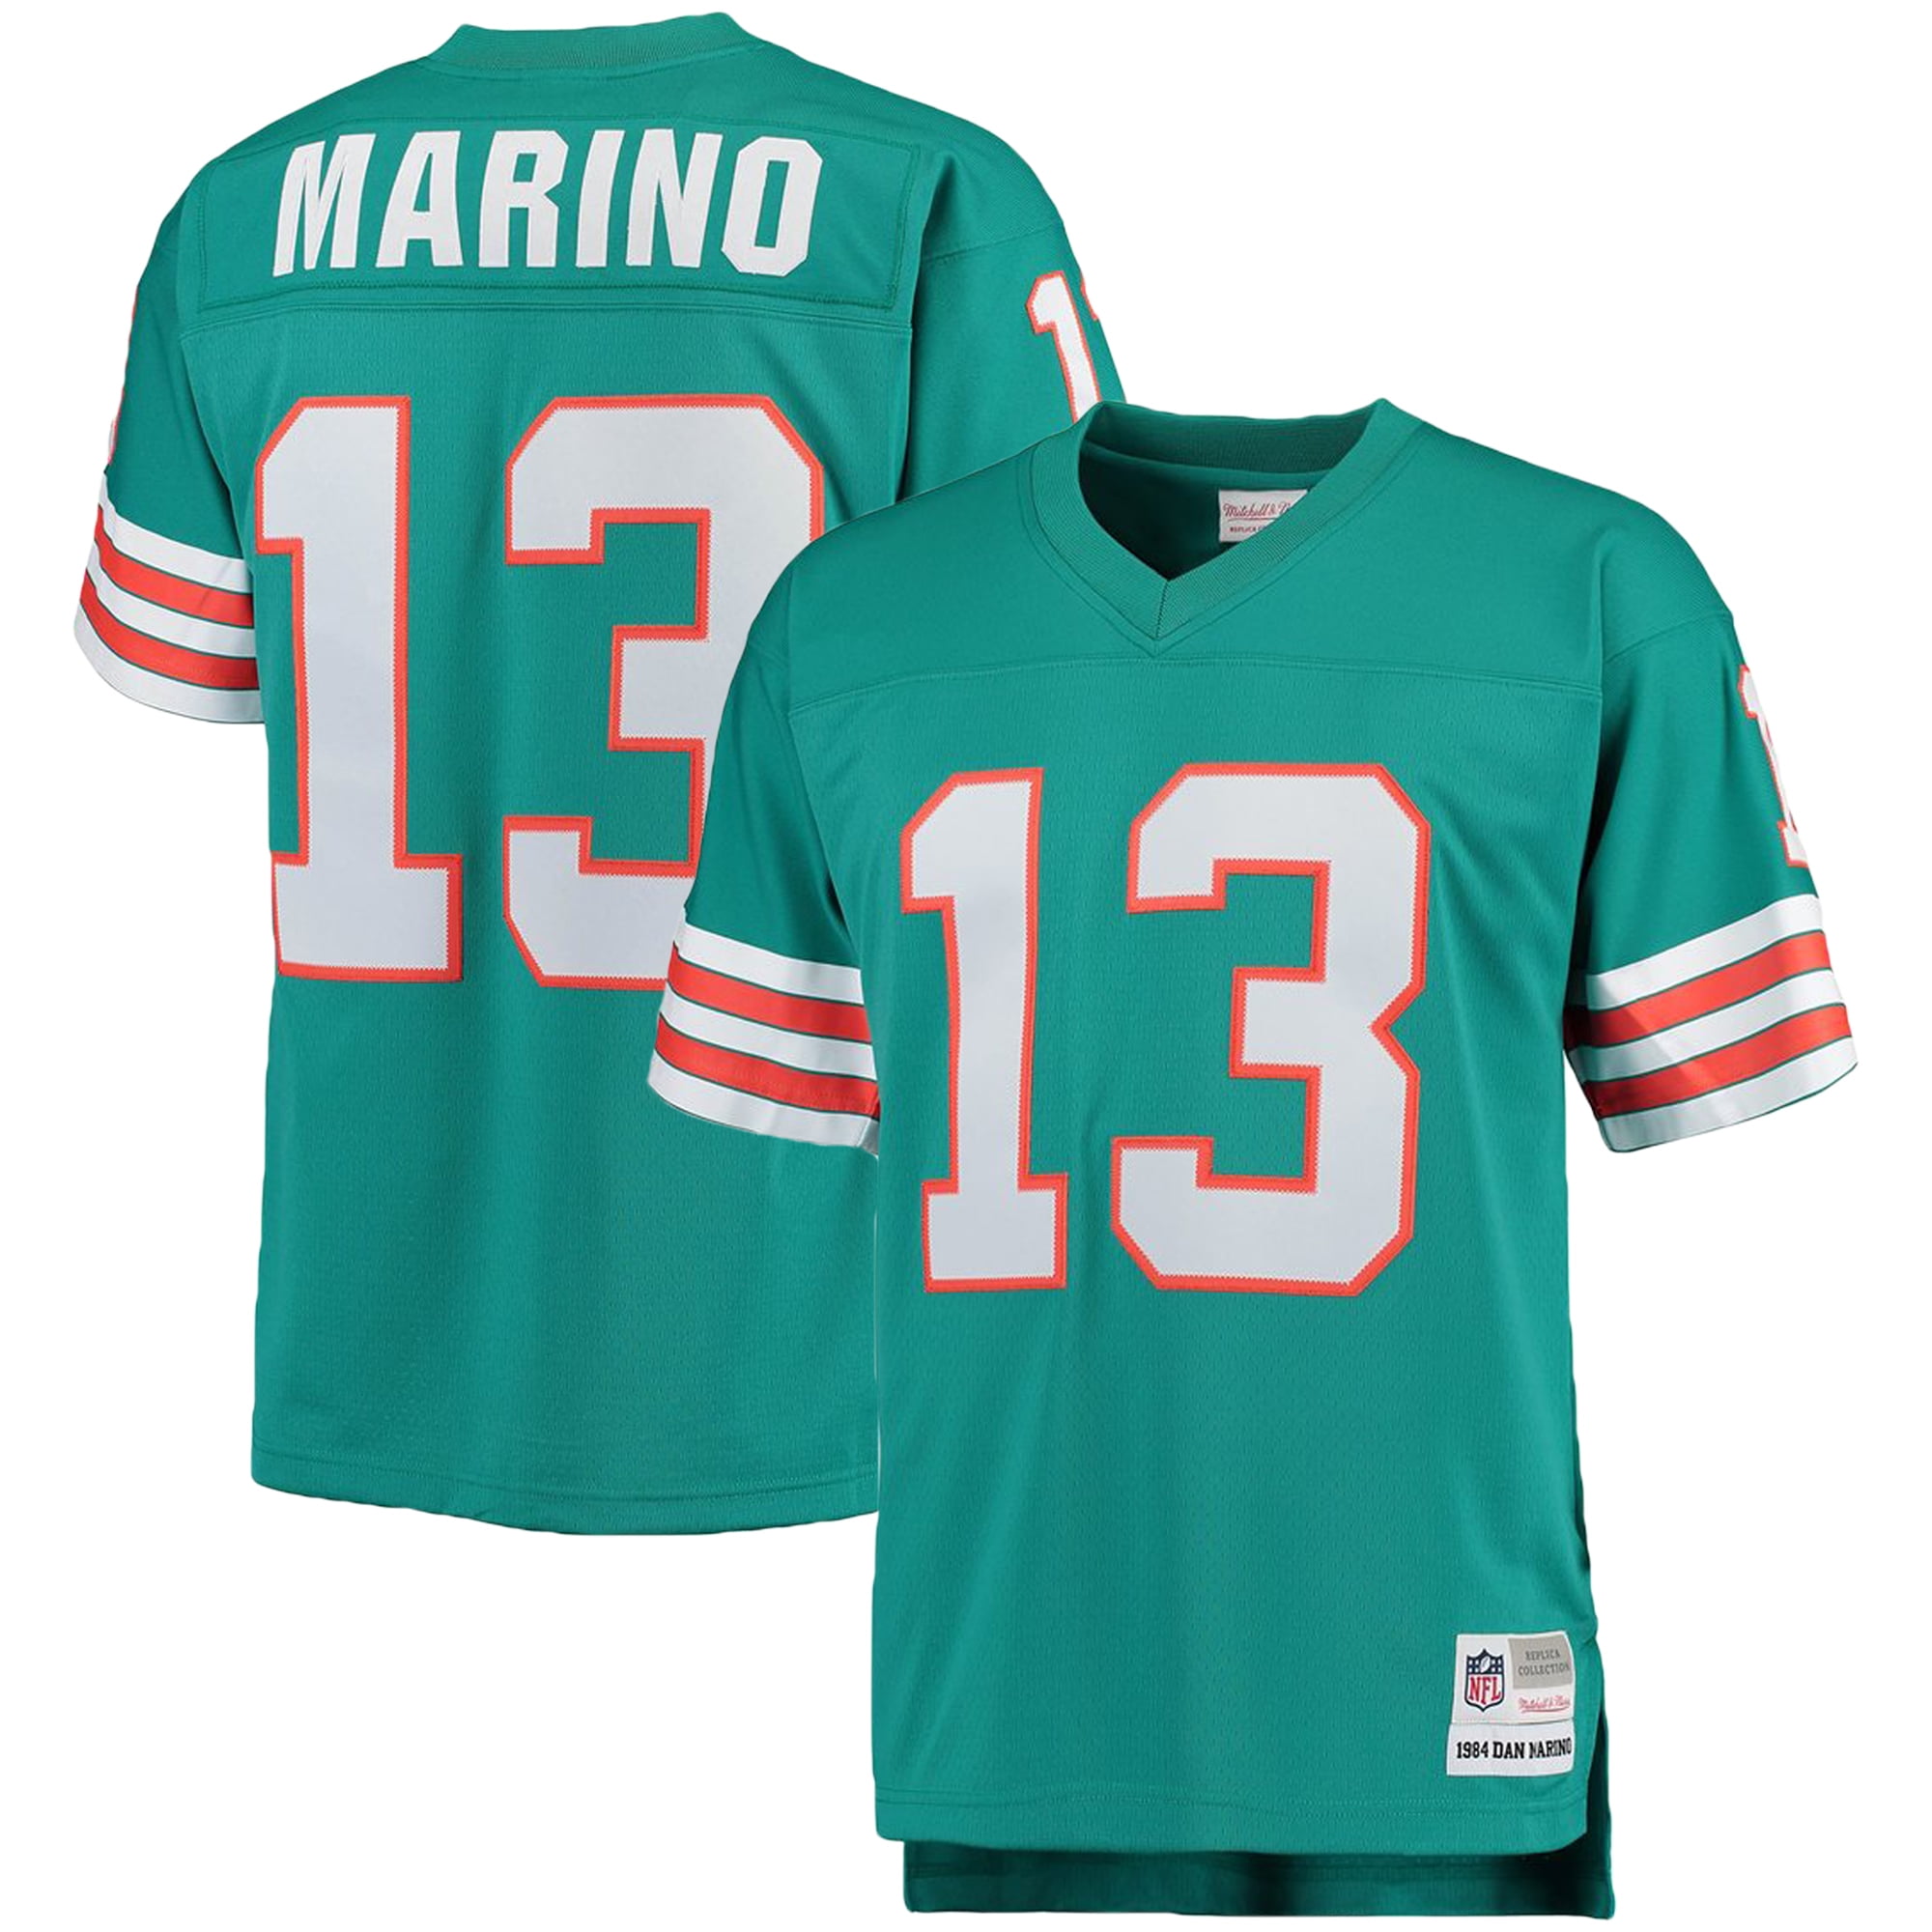 retired dolphins jerseys